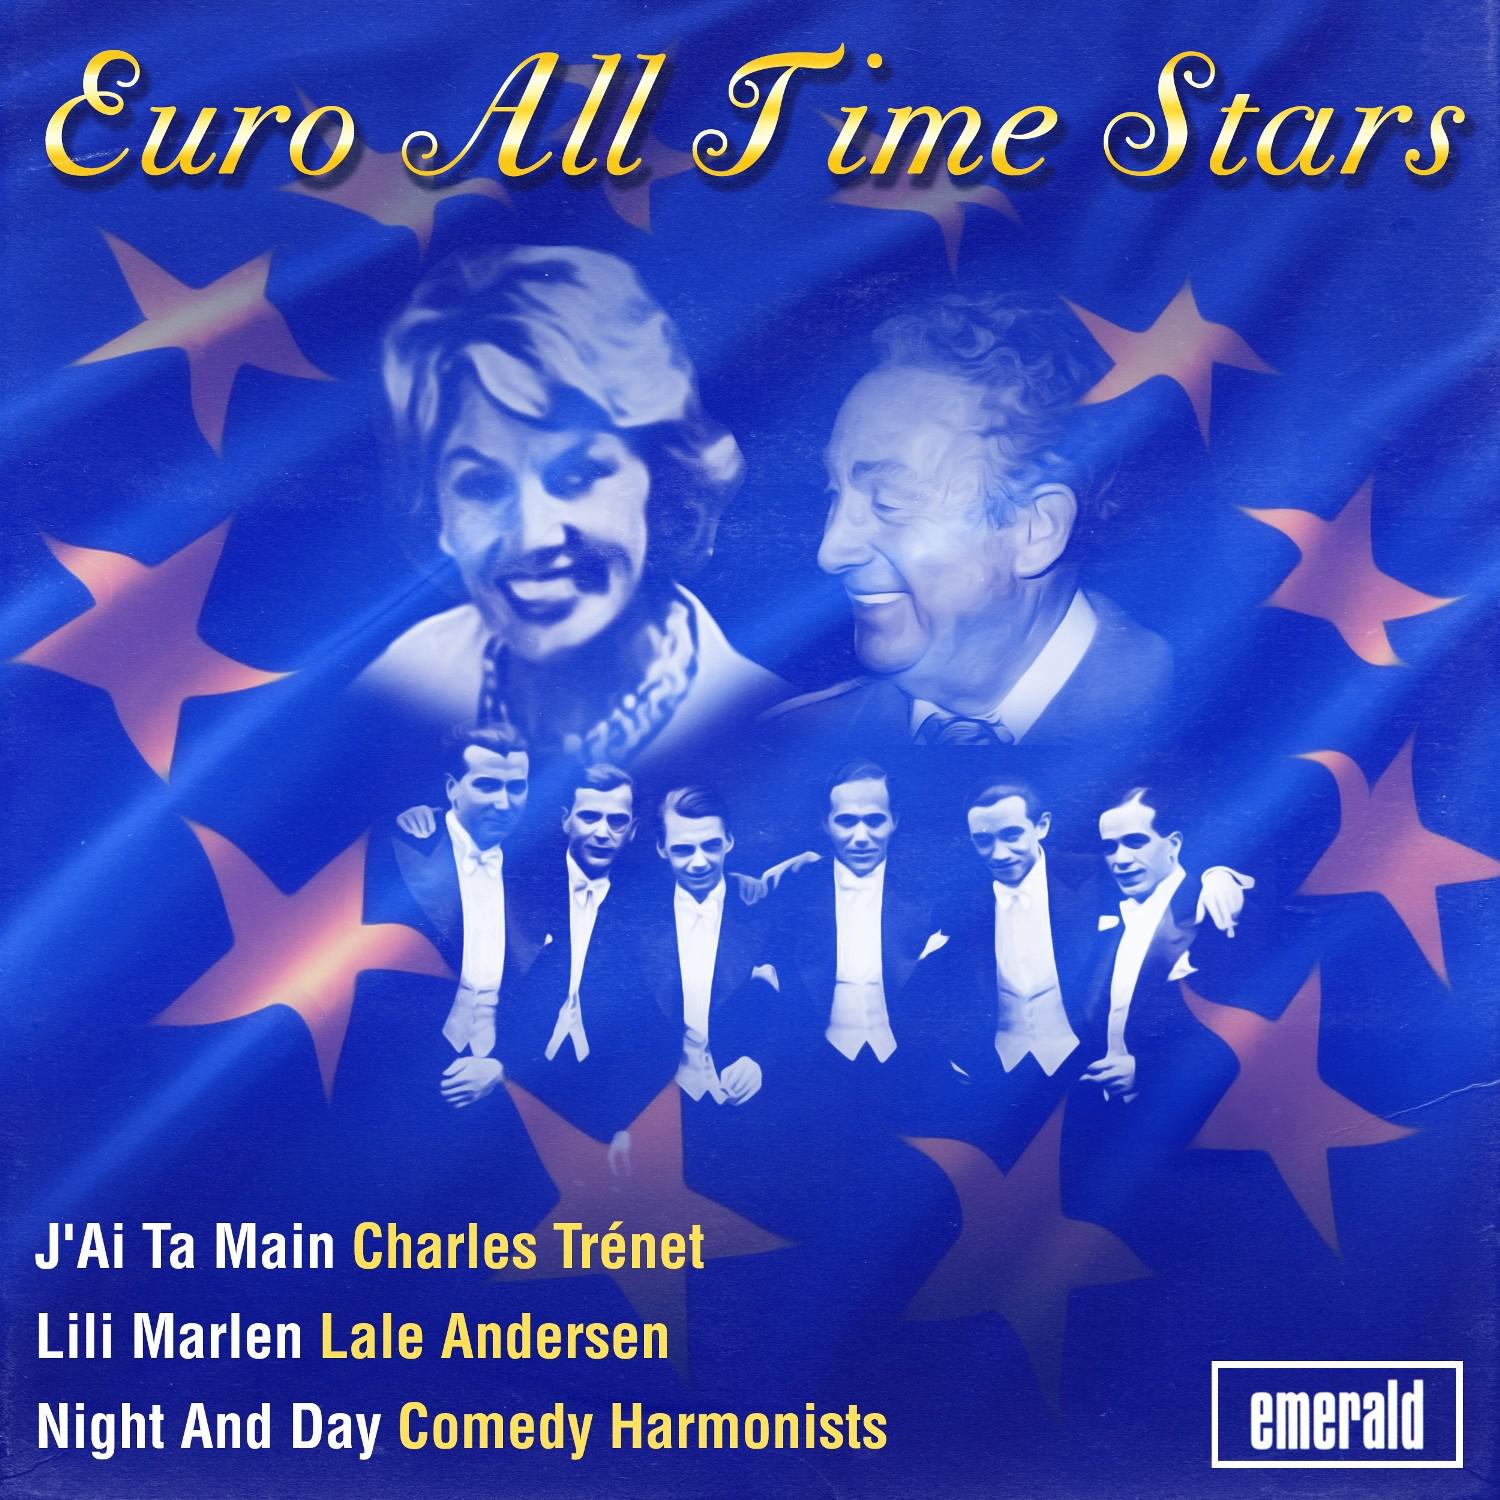 Euro All Time Stars